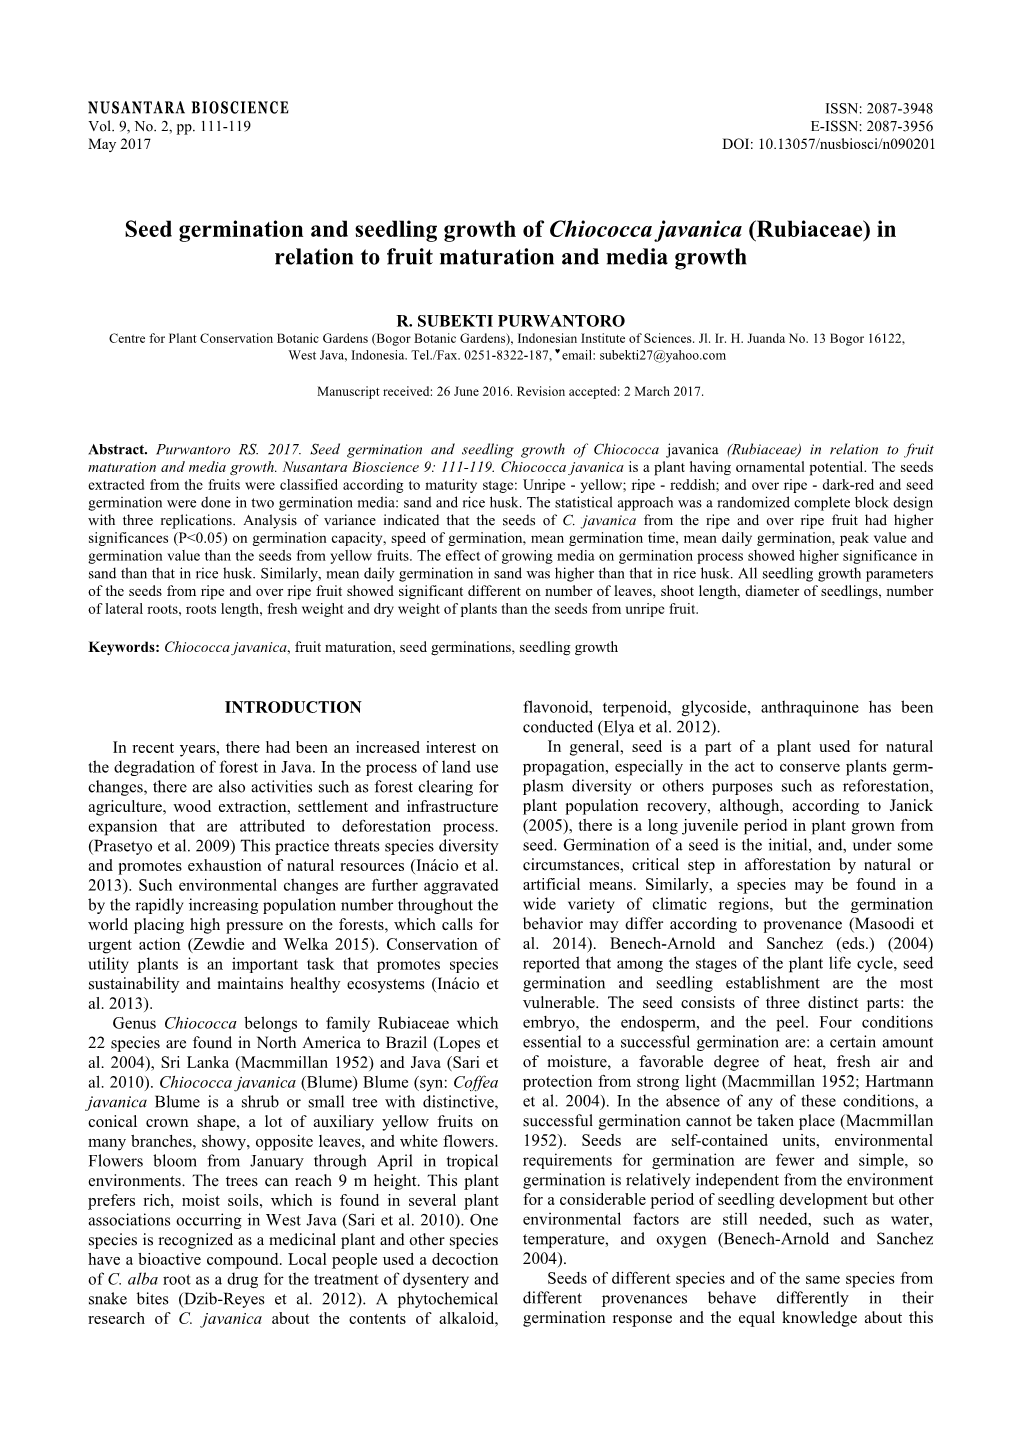 Seed Germination and Seedling Growth of Chiococca Javanica (Rubiaceae) in Relation to Fruit Maturation and Media Growth